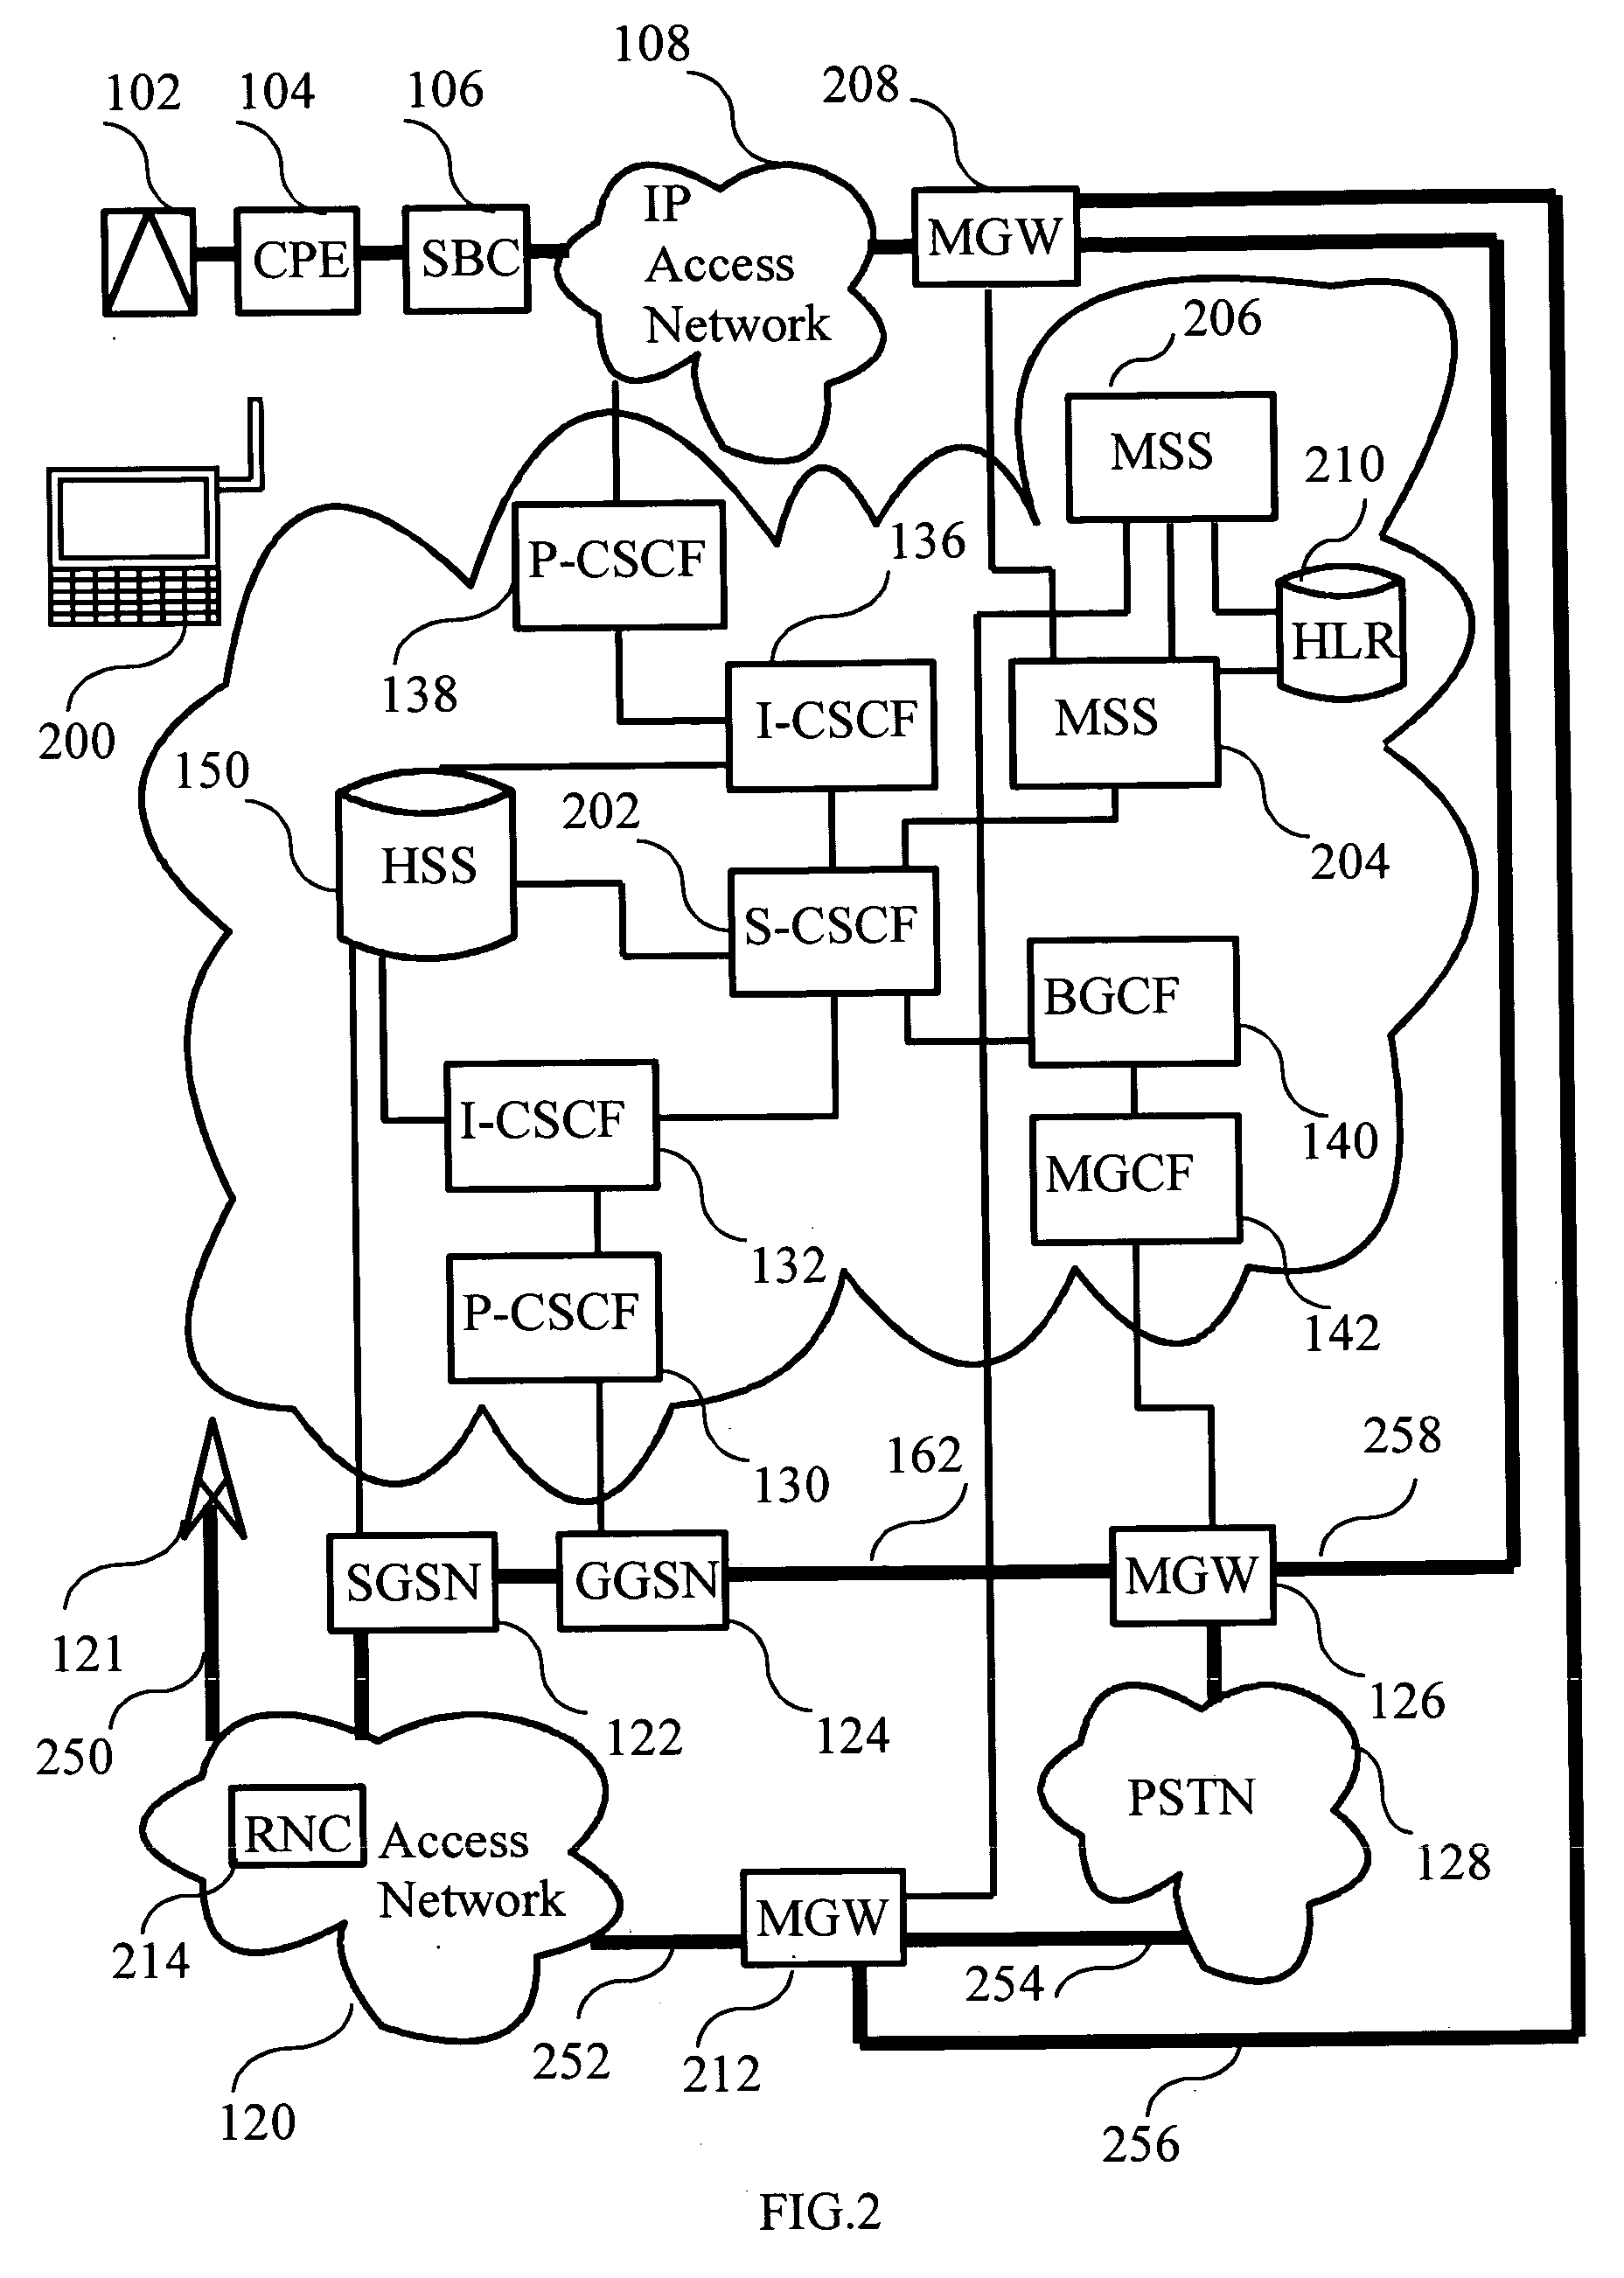 Method for performing inter-system handovers in a mobile communication system